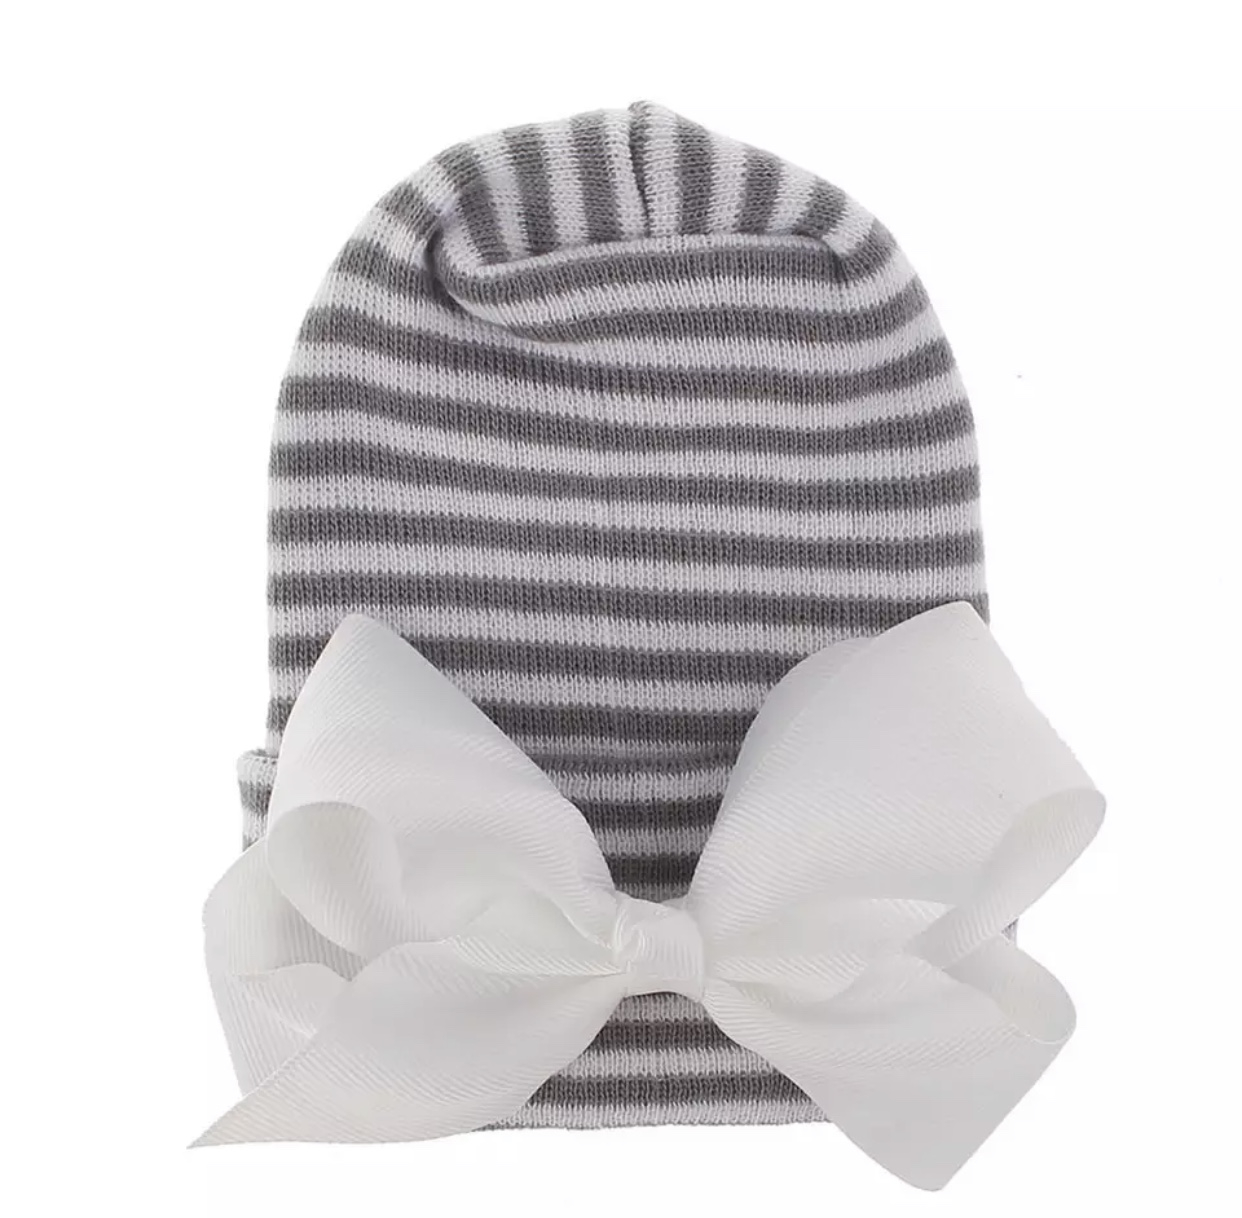 Newborn hat gray white with white ribbon bow extra warm